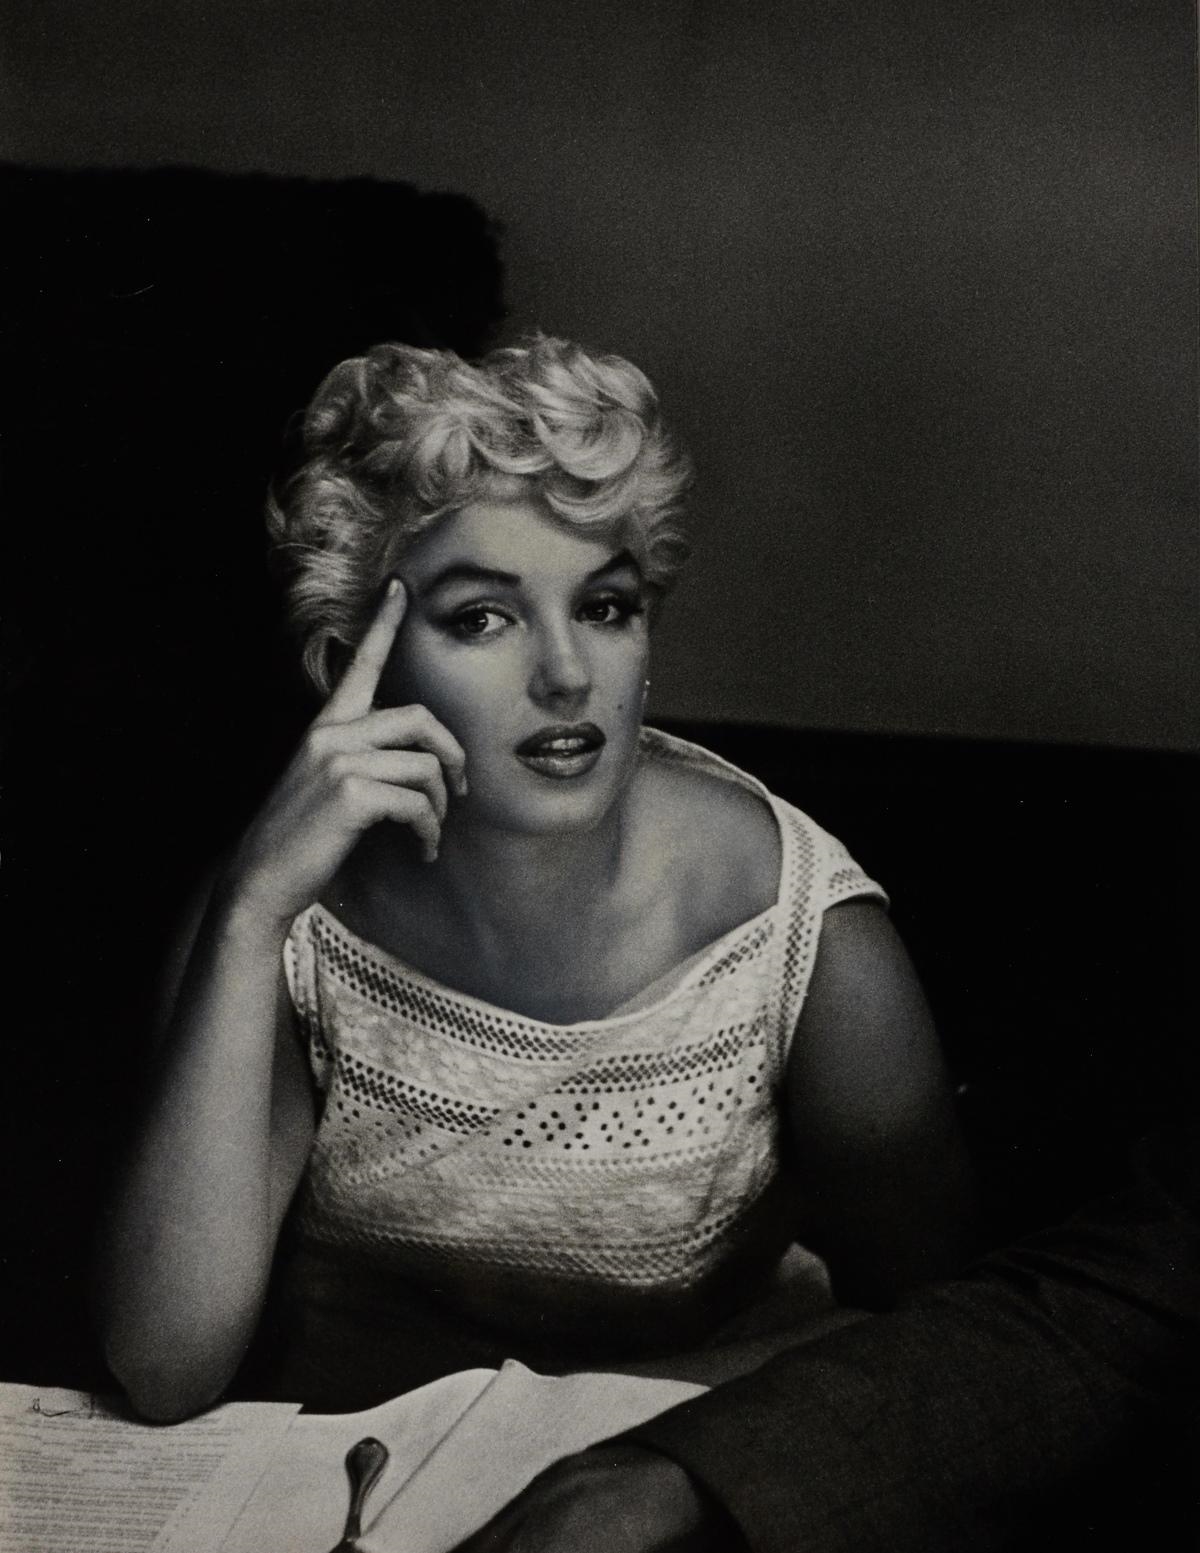 Marilyn Monroe by Eve Arnold, 1955